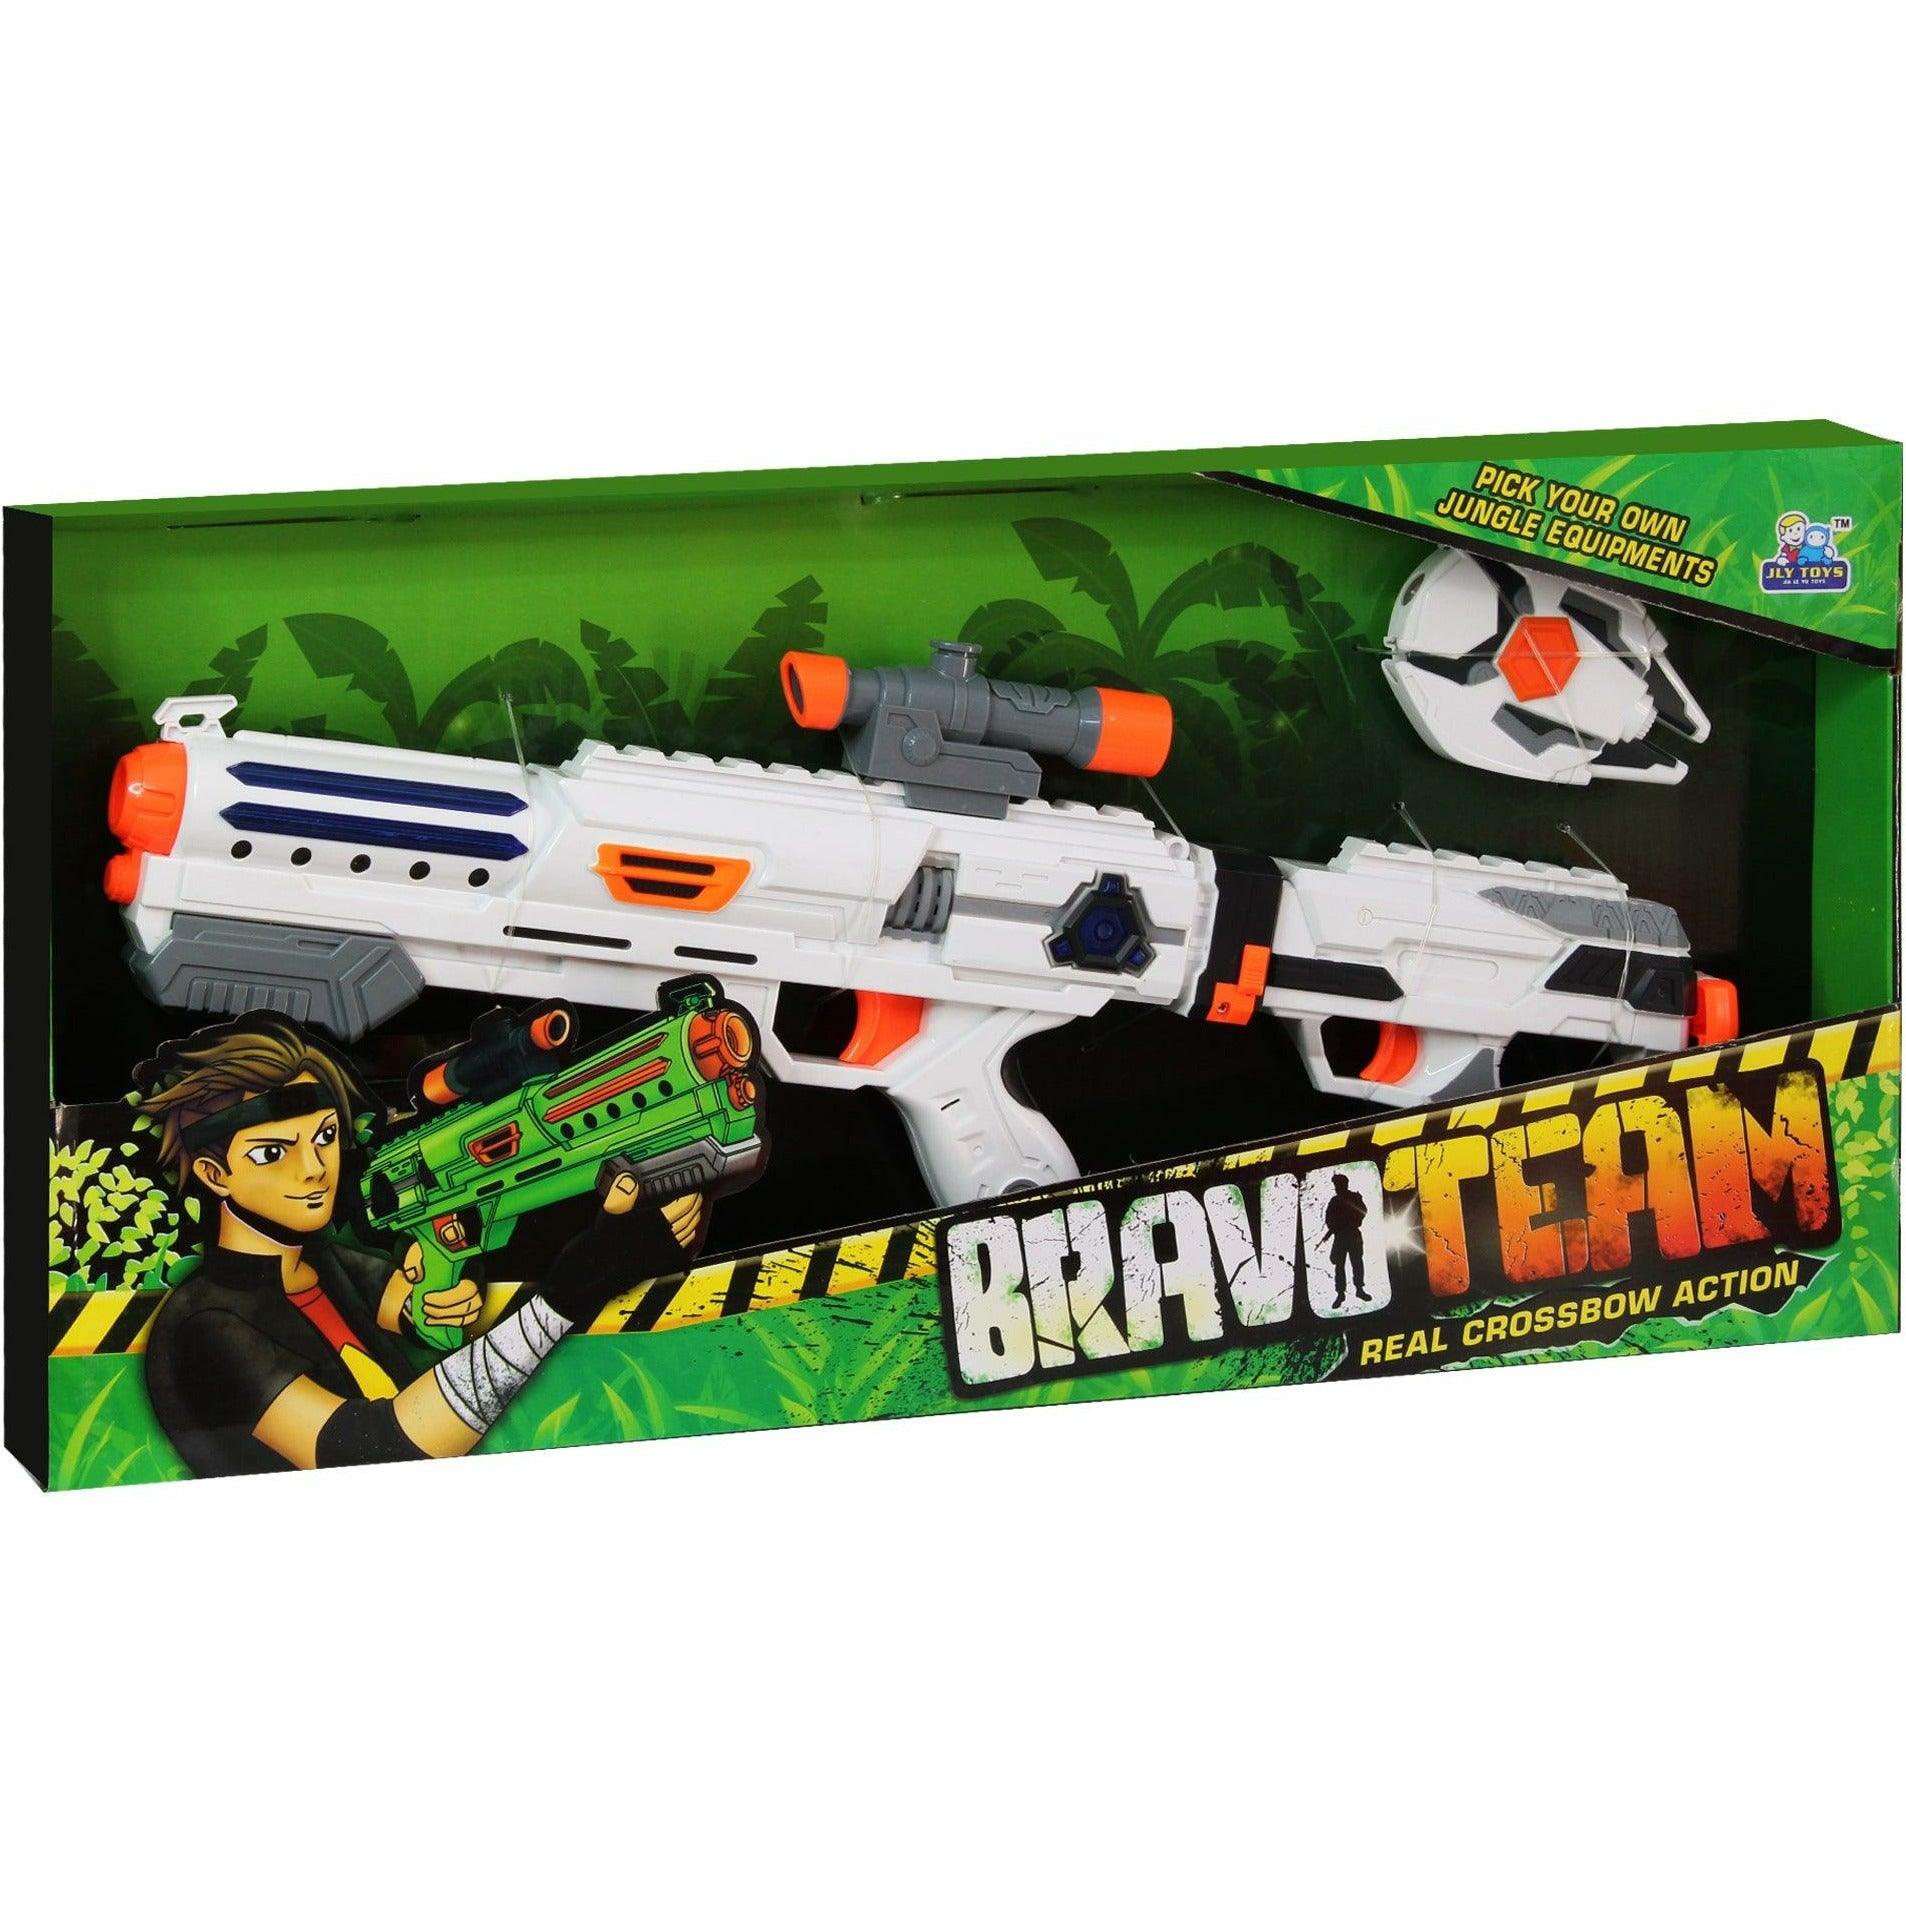 Bravo Team Jumbo Gun Real Crossbow Action With Sound & Light - BumbleToys - 5-7 Years, 6+ Years, Blasters, Blasters & Water Pistols, Boys, Guns, Toy House